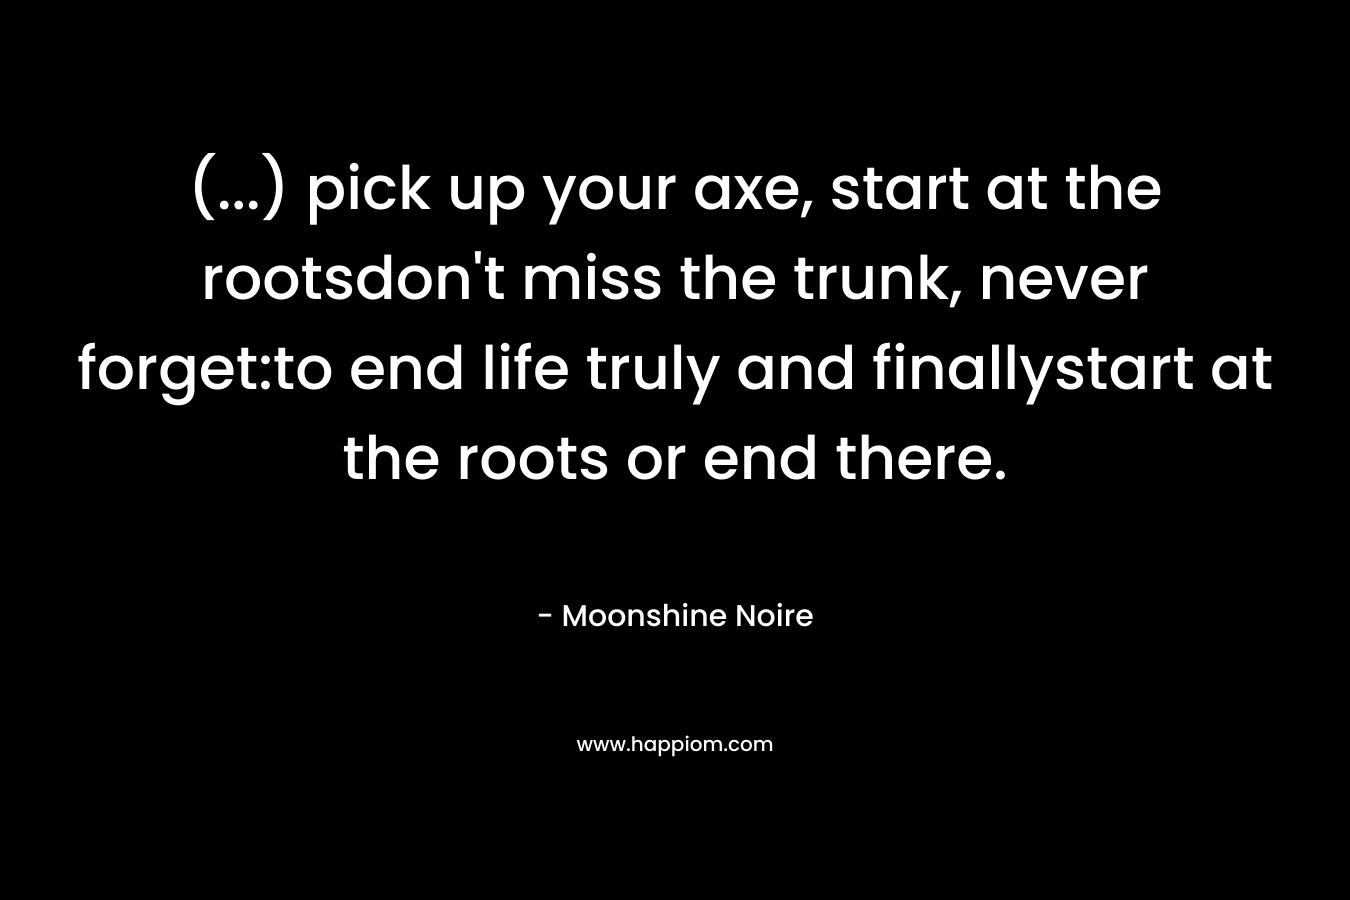 (…) pick up your axe, start at the rootsdon’t miss the trunk, never forget:to end life truly and finallystart at the roots or end there. – Moonshine Noire